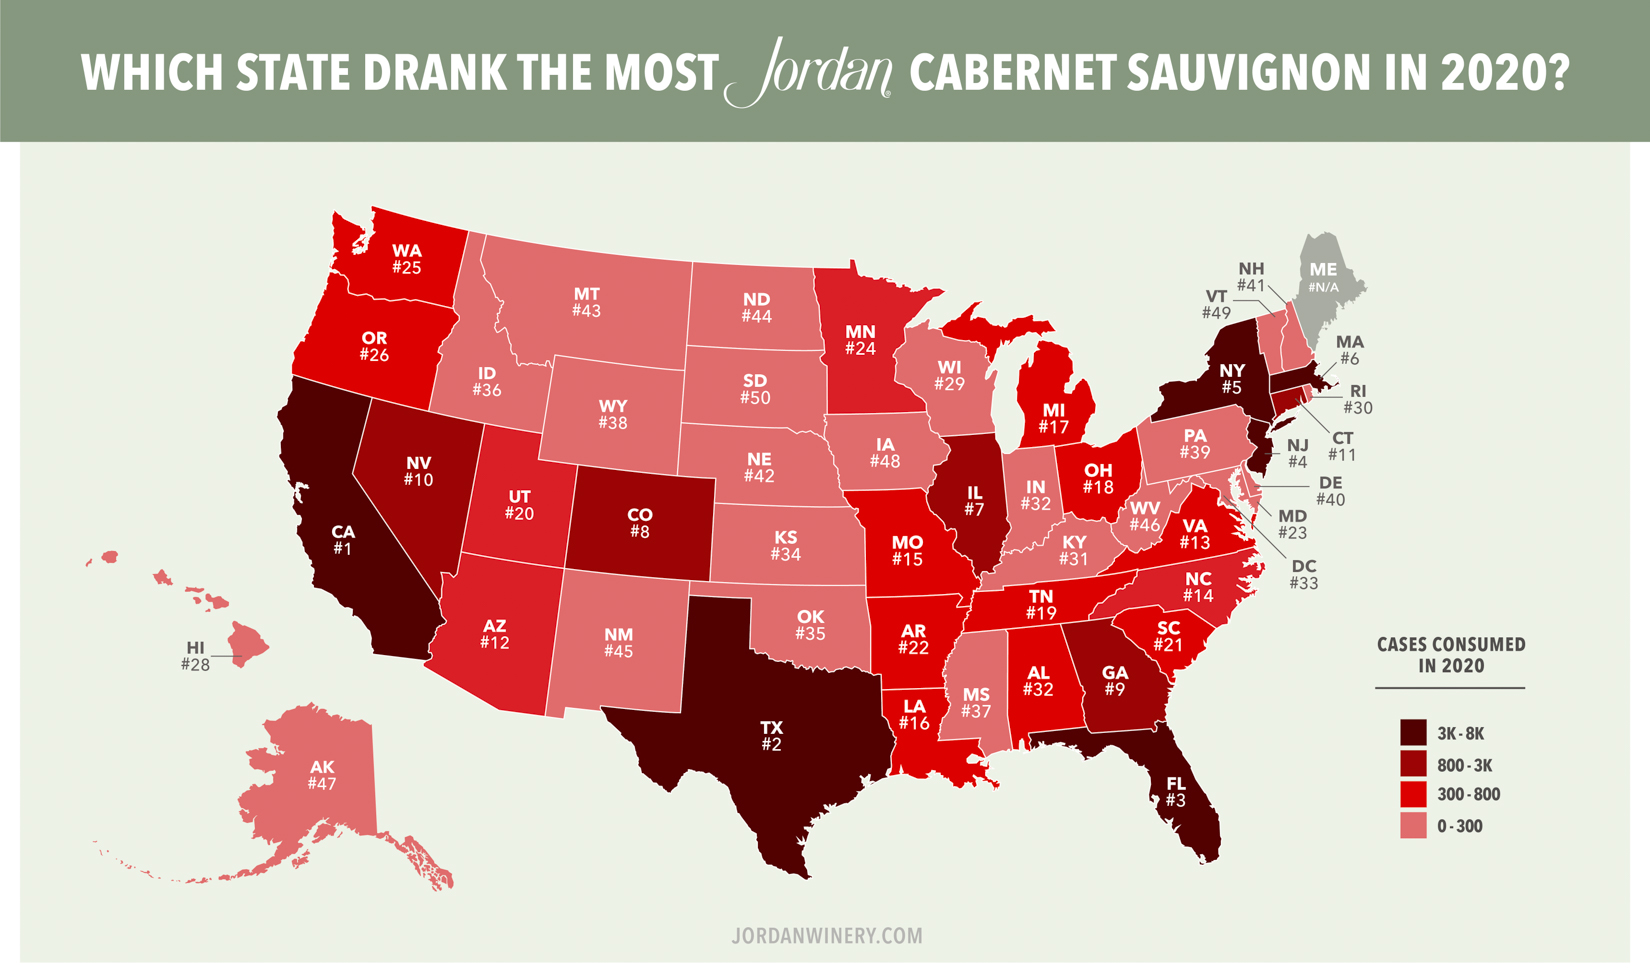 Map showing Jordan Cabernet Sauvignon wine cases purchased by state